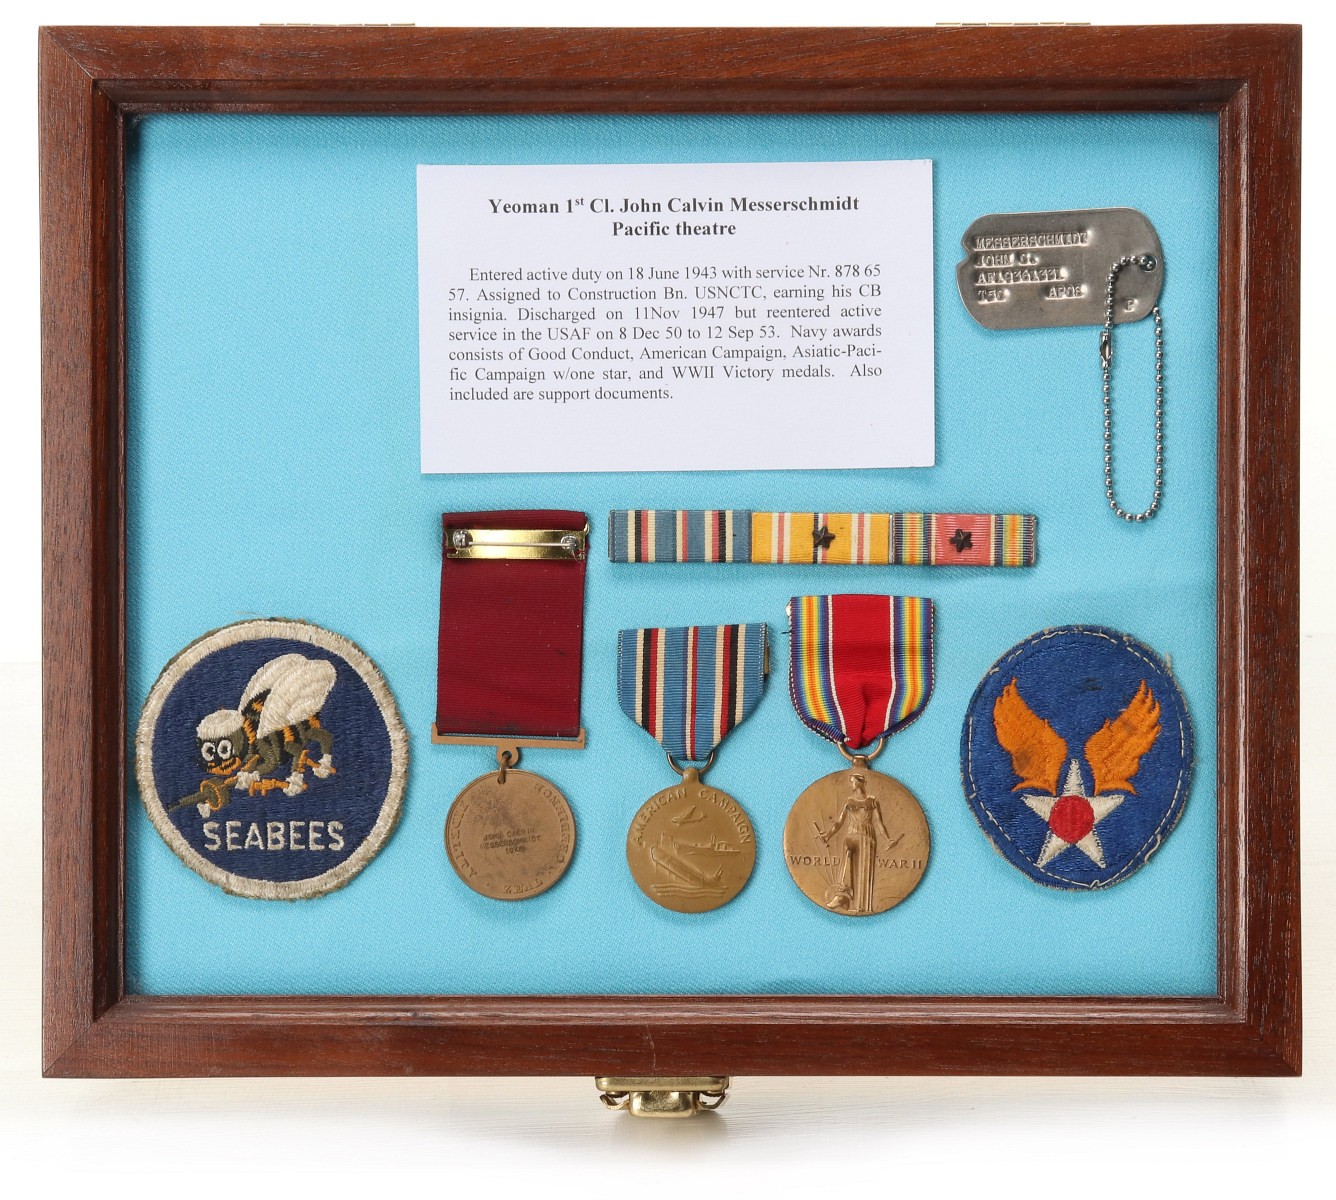 YEOMAN MESSERSCHMIDT'S USNR MEDALS AND OTHER EFFECTS